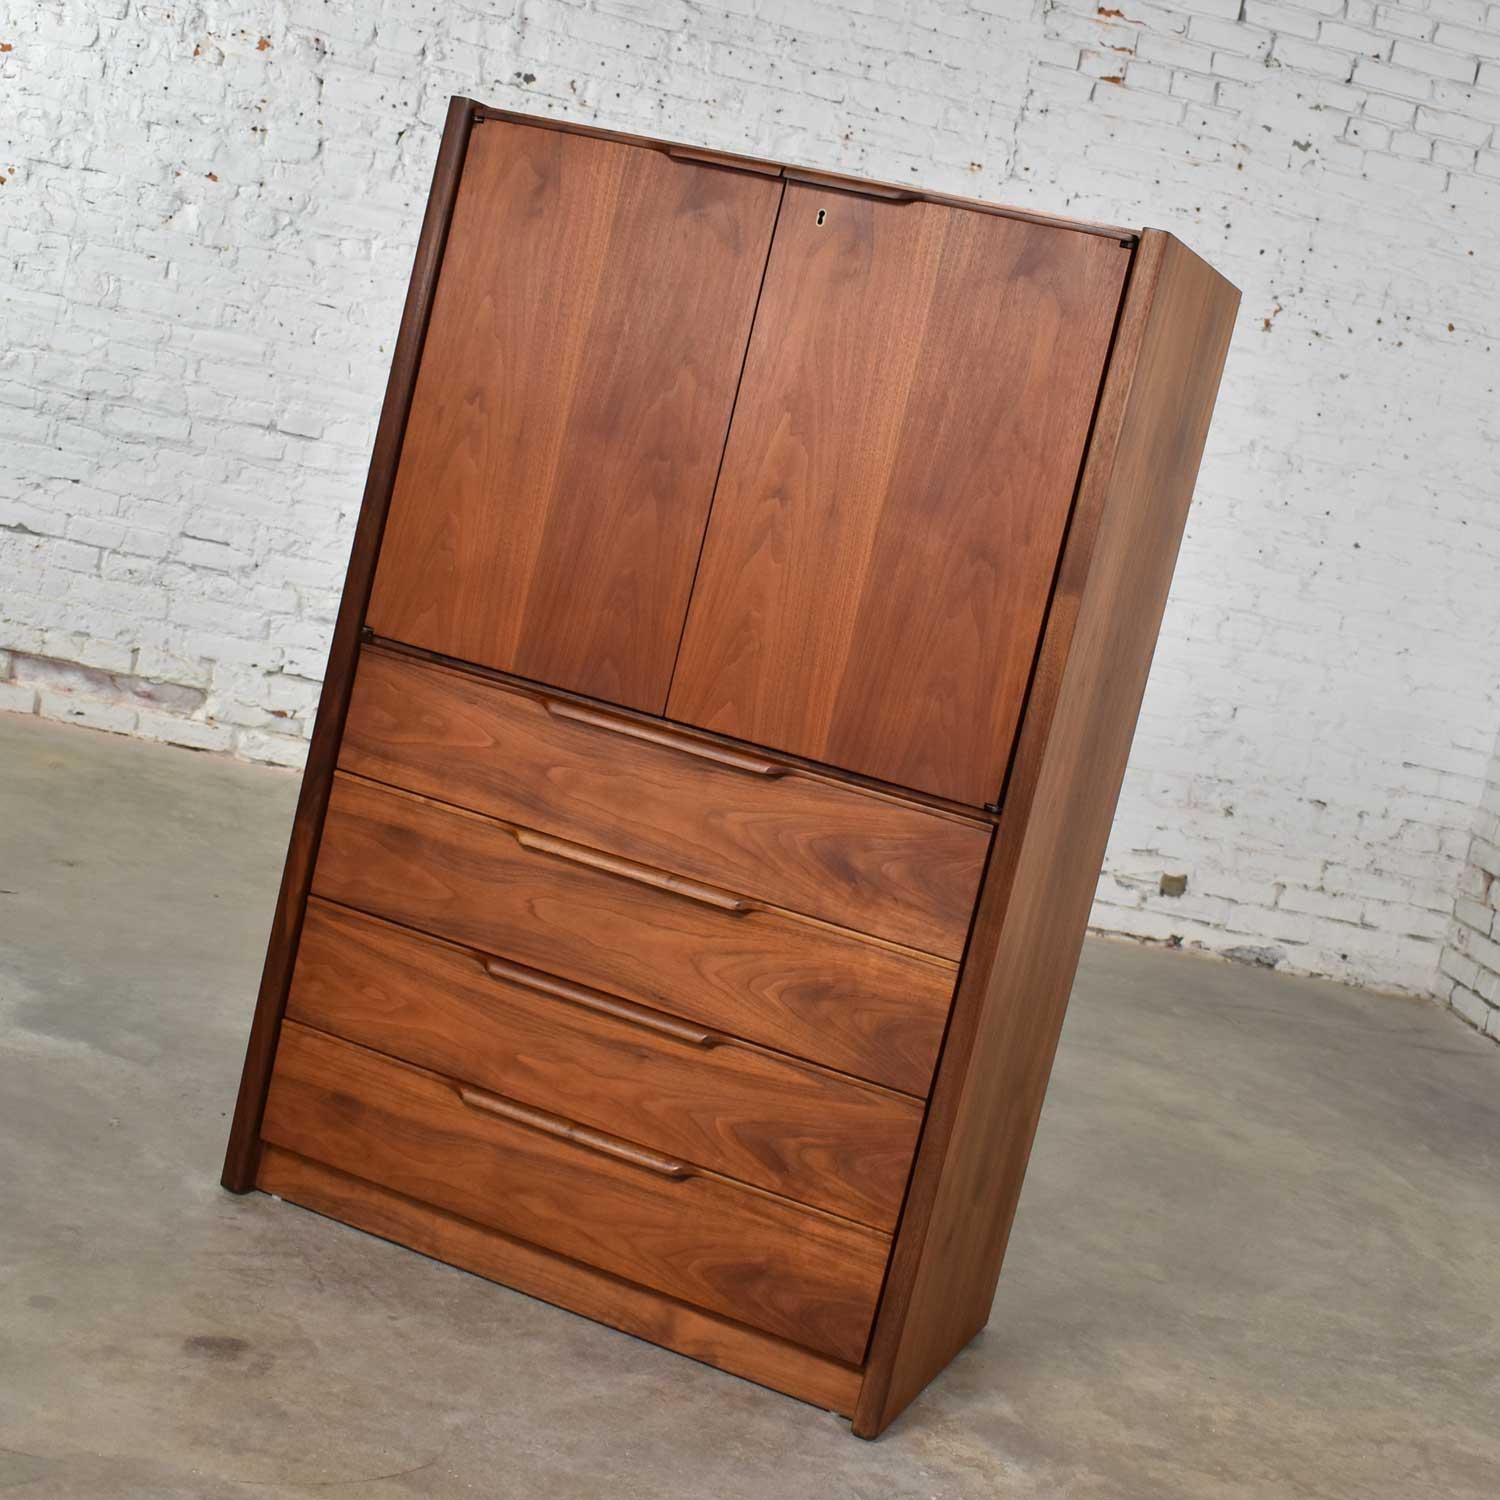 Handsome Scandinavian Modern style gentlemen’s chest in walnut by Barzilay Furniture Manufacturing. It is in fabulous vintage condition with no outstanding flaws we have found. Please see photos, circa 1980s.

Wow! You should have seen the